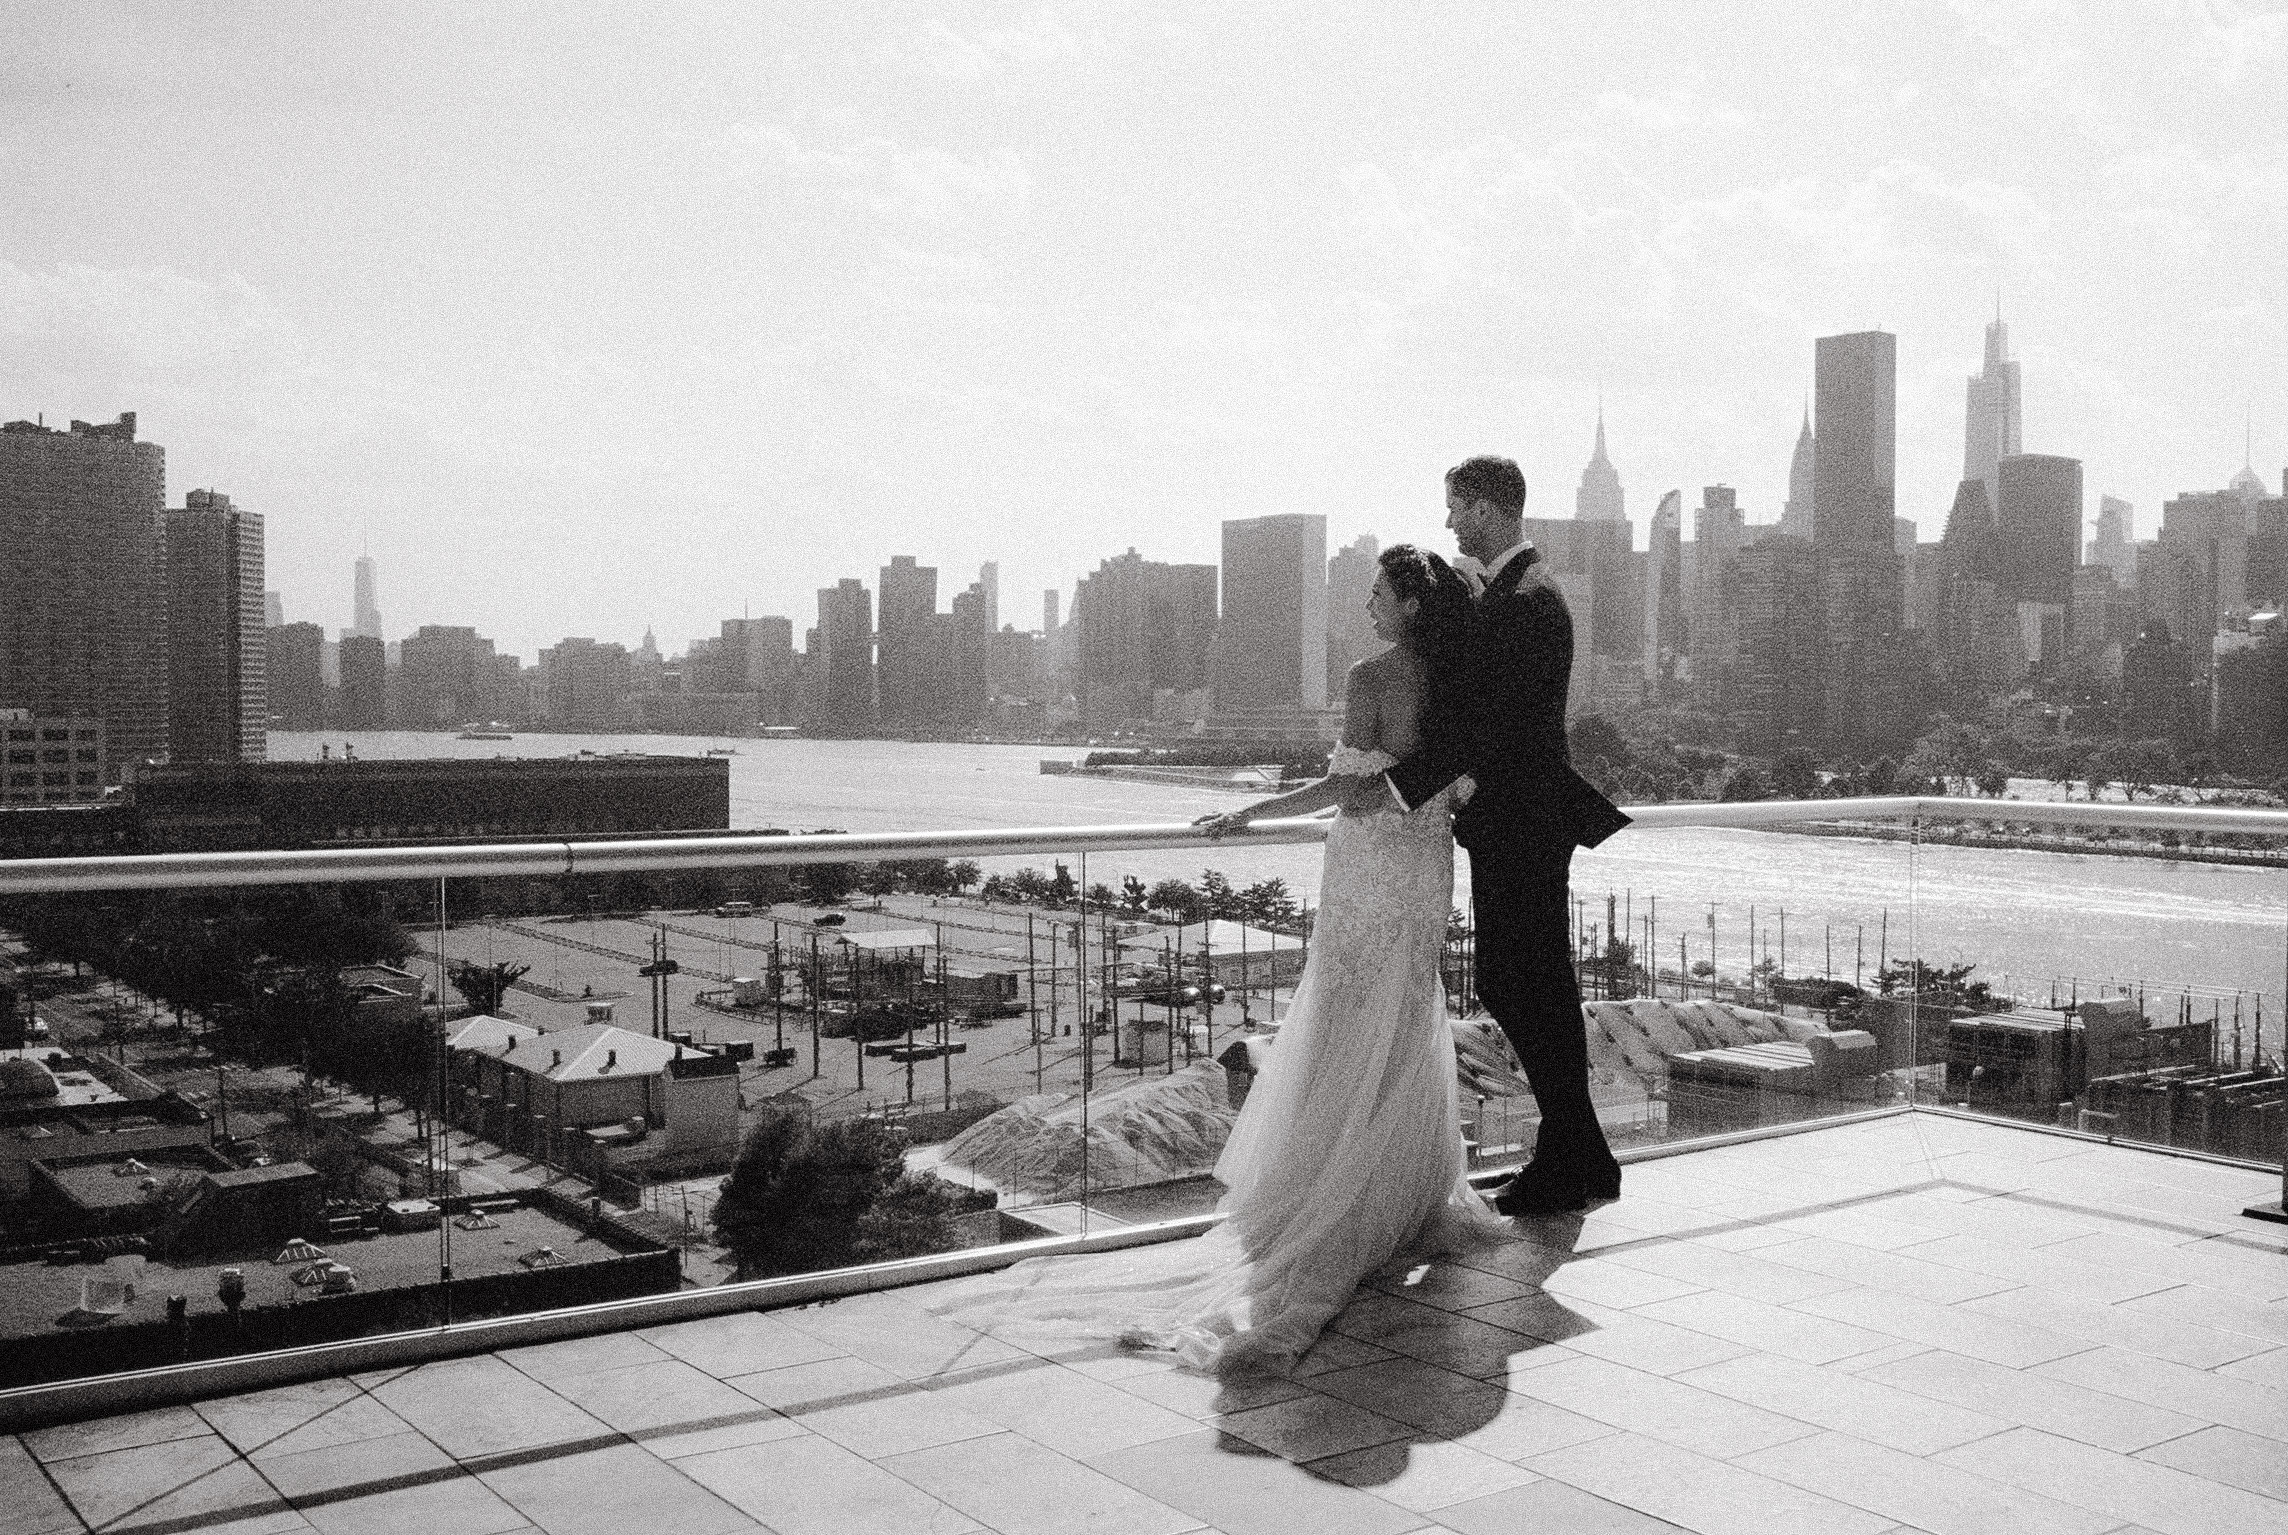 The bride and groom are looking towards the city, with NYC skyscrapers in the background. Image by Jenny Fu Studio